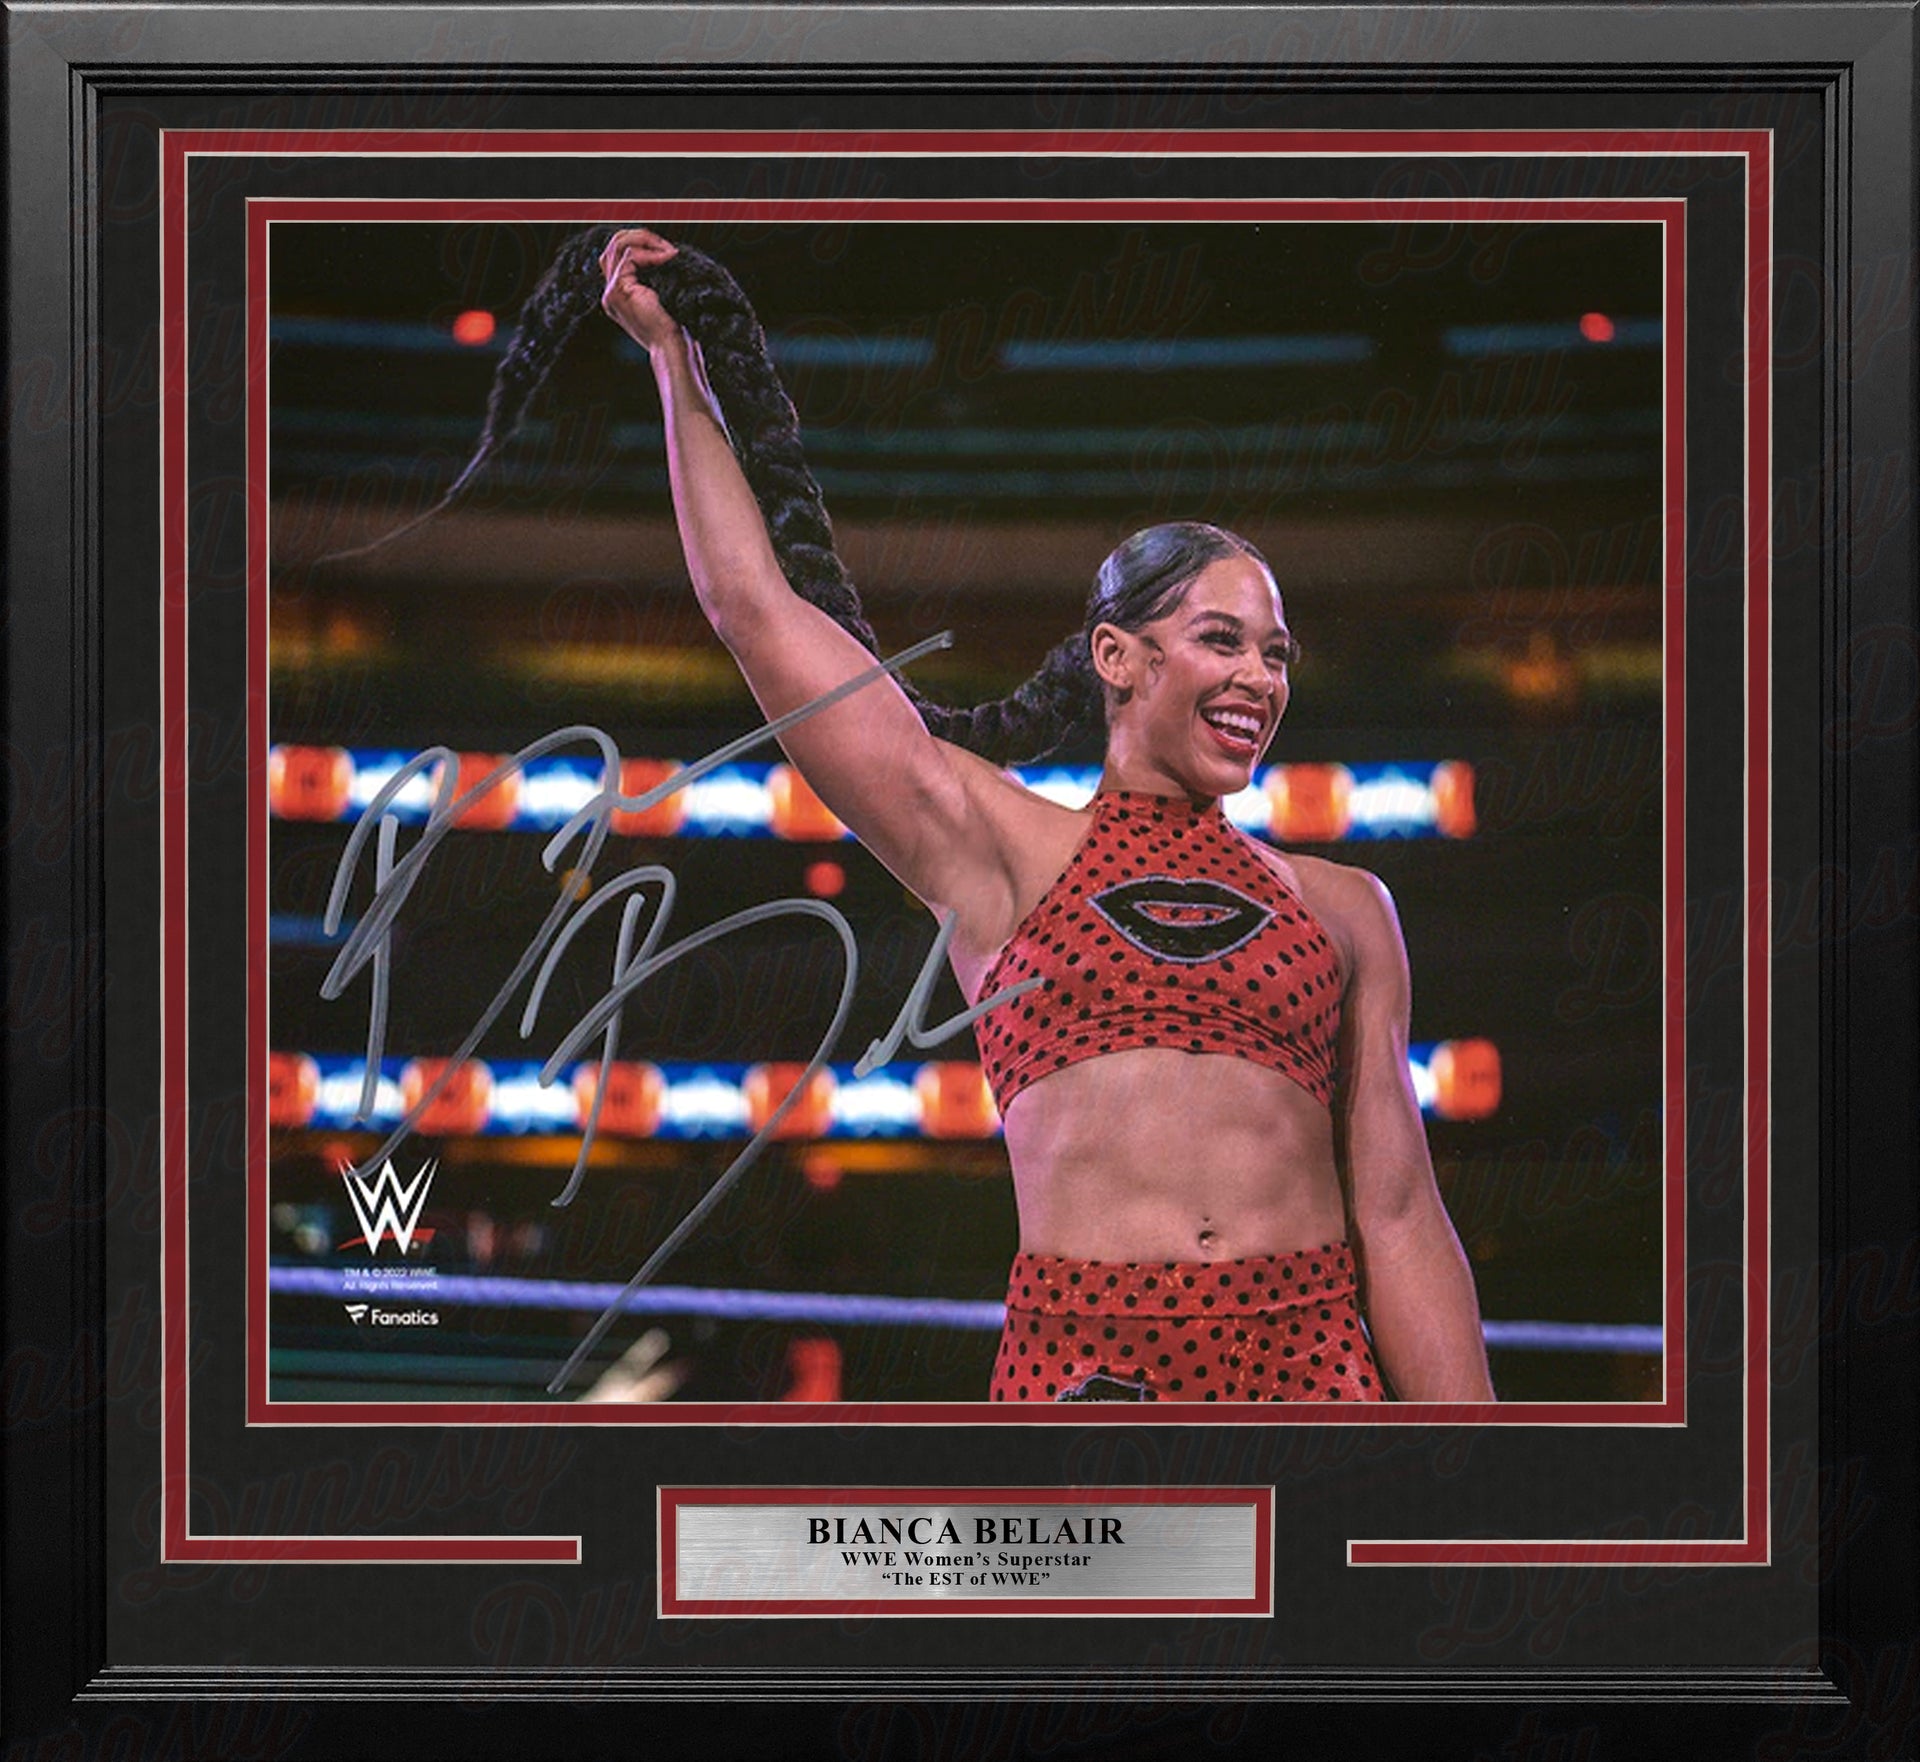 Bianca Belair Hair Whip Autographed 16" x 20" Framed WWE Wrestling Photo - Dynasty Sports & Framing 